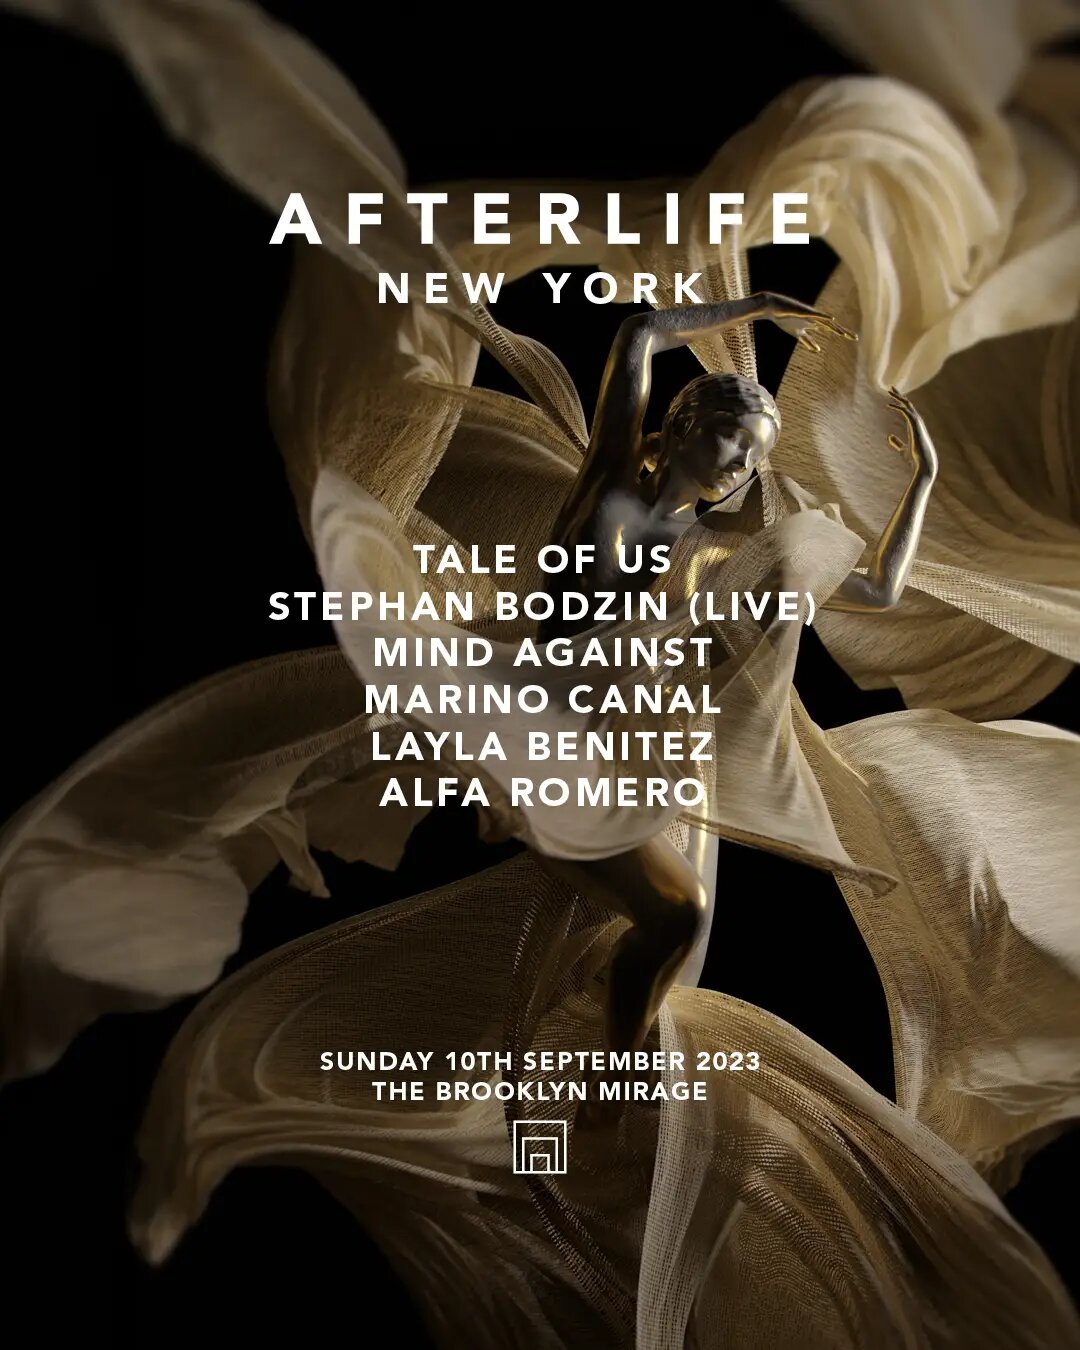 Tale of Us to Headline Two-Night Run for Afterlife's West Coast